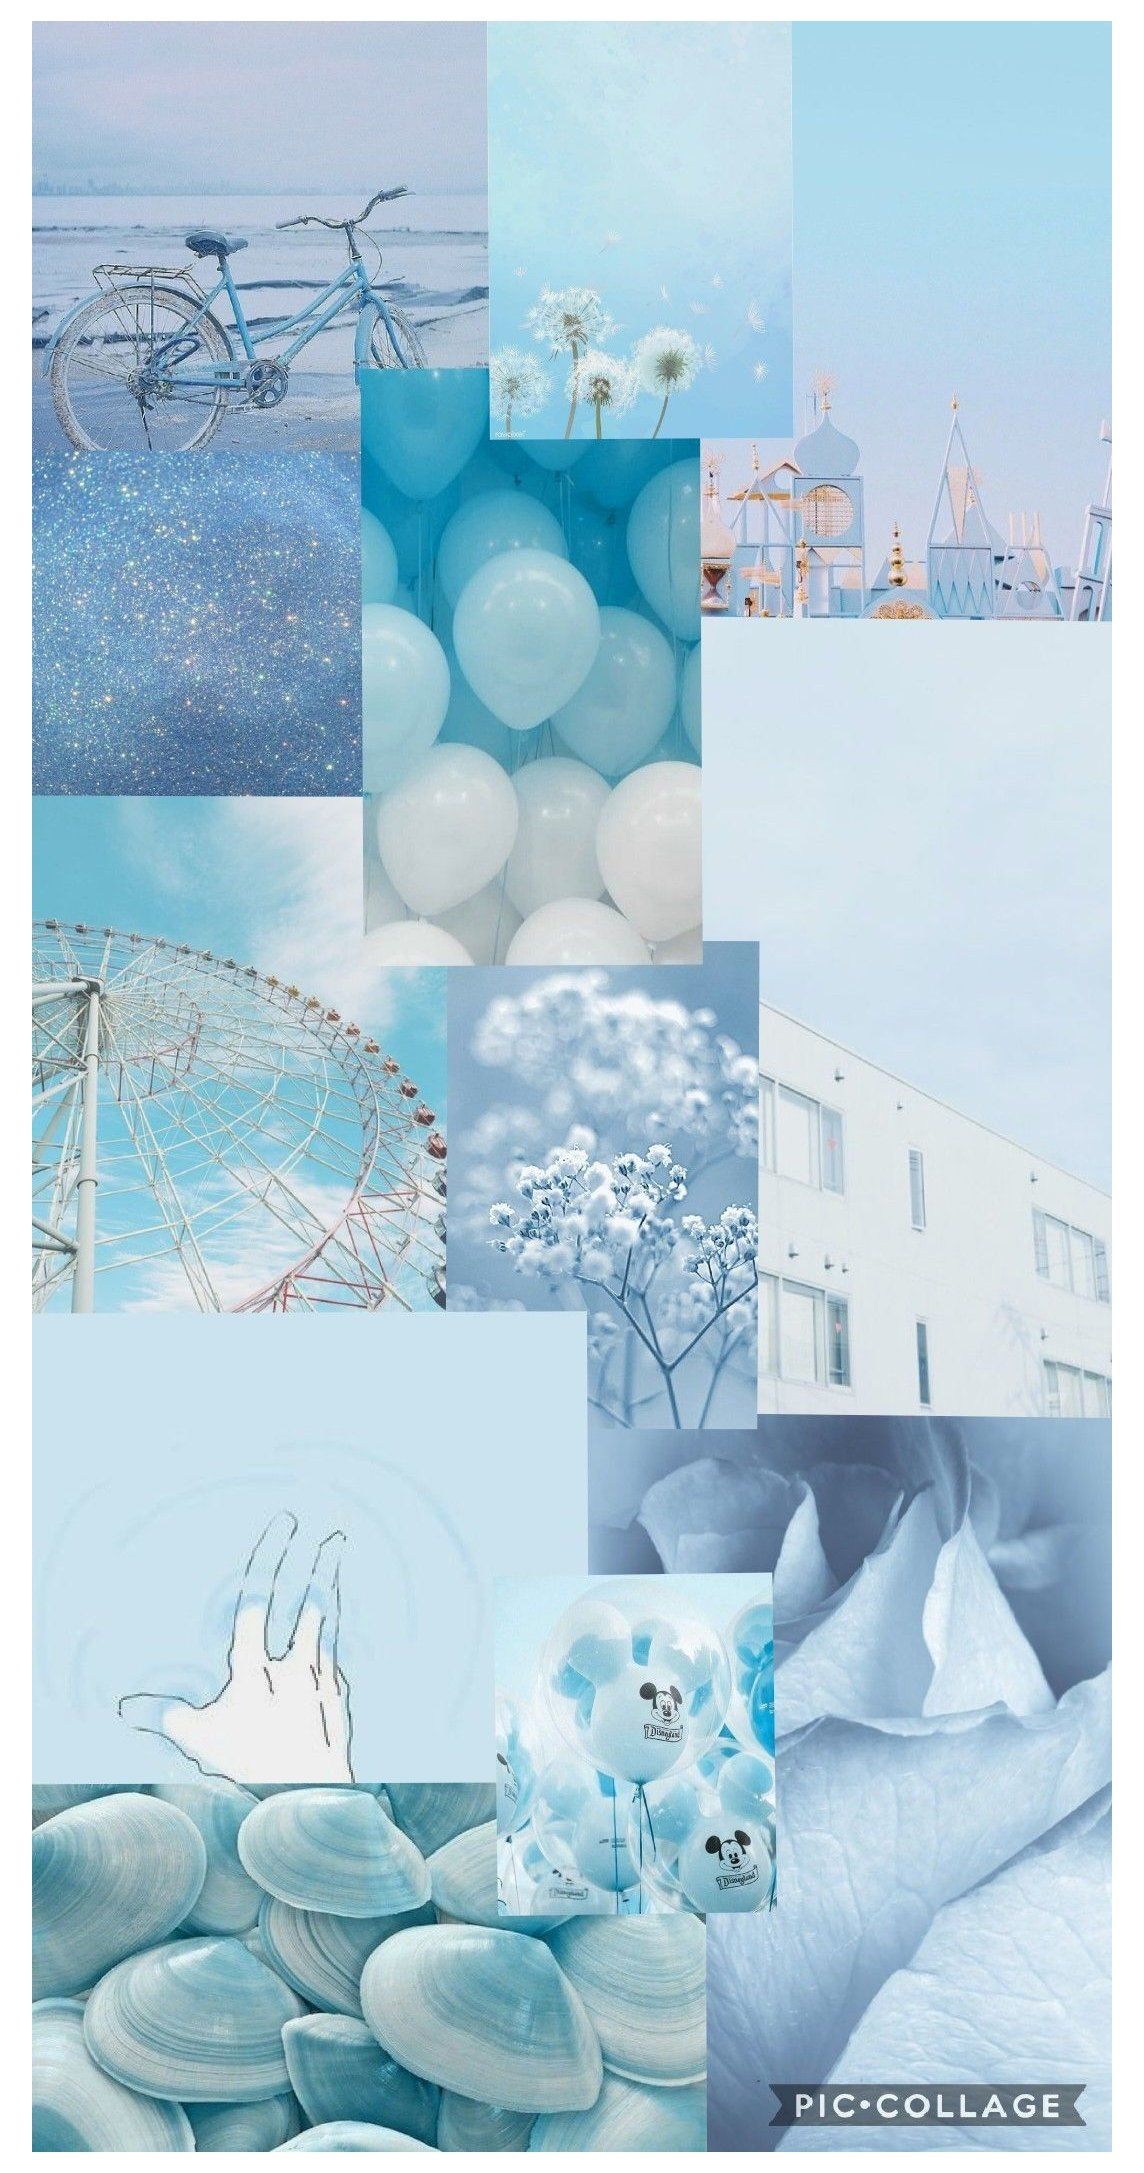 Aesthetic backgrounds for phone and desktop backgrounds. - Pastel blue